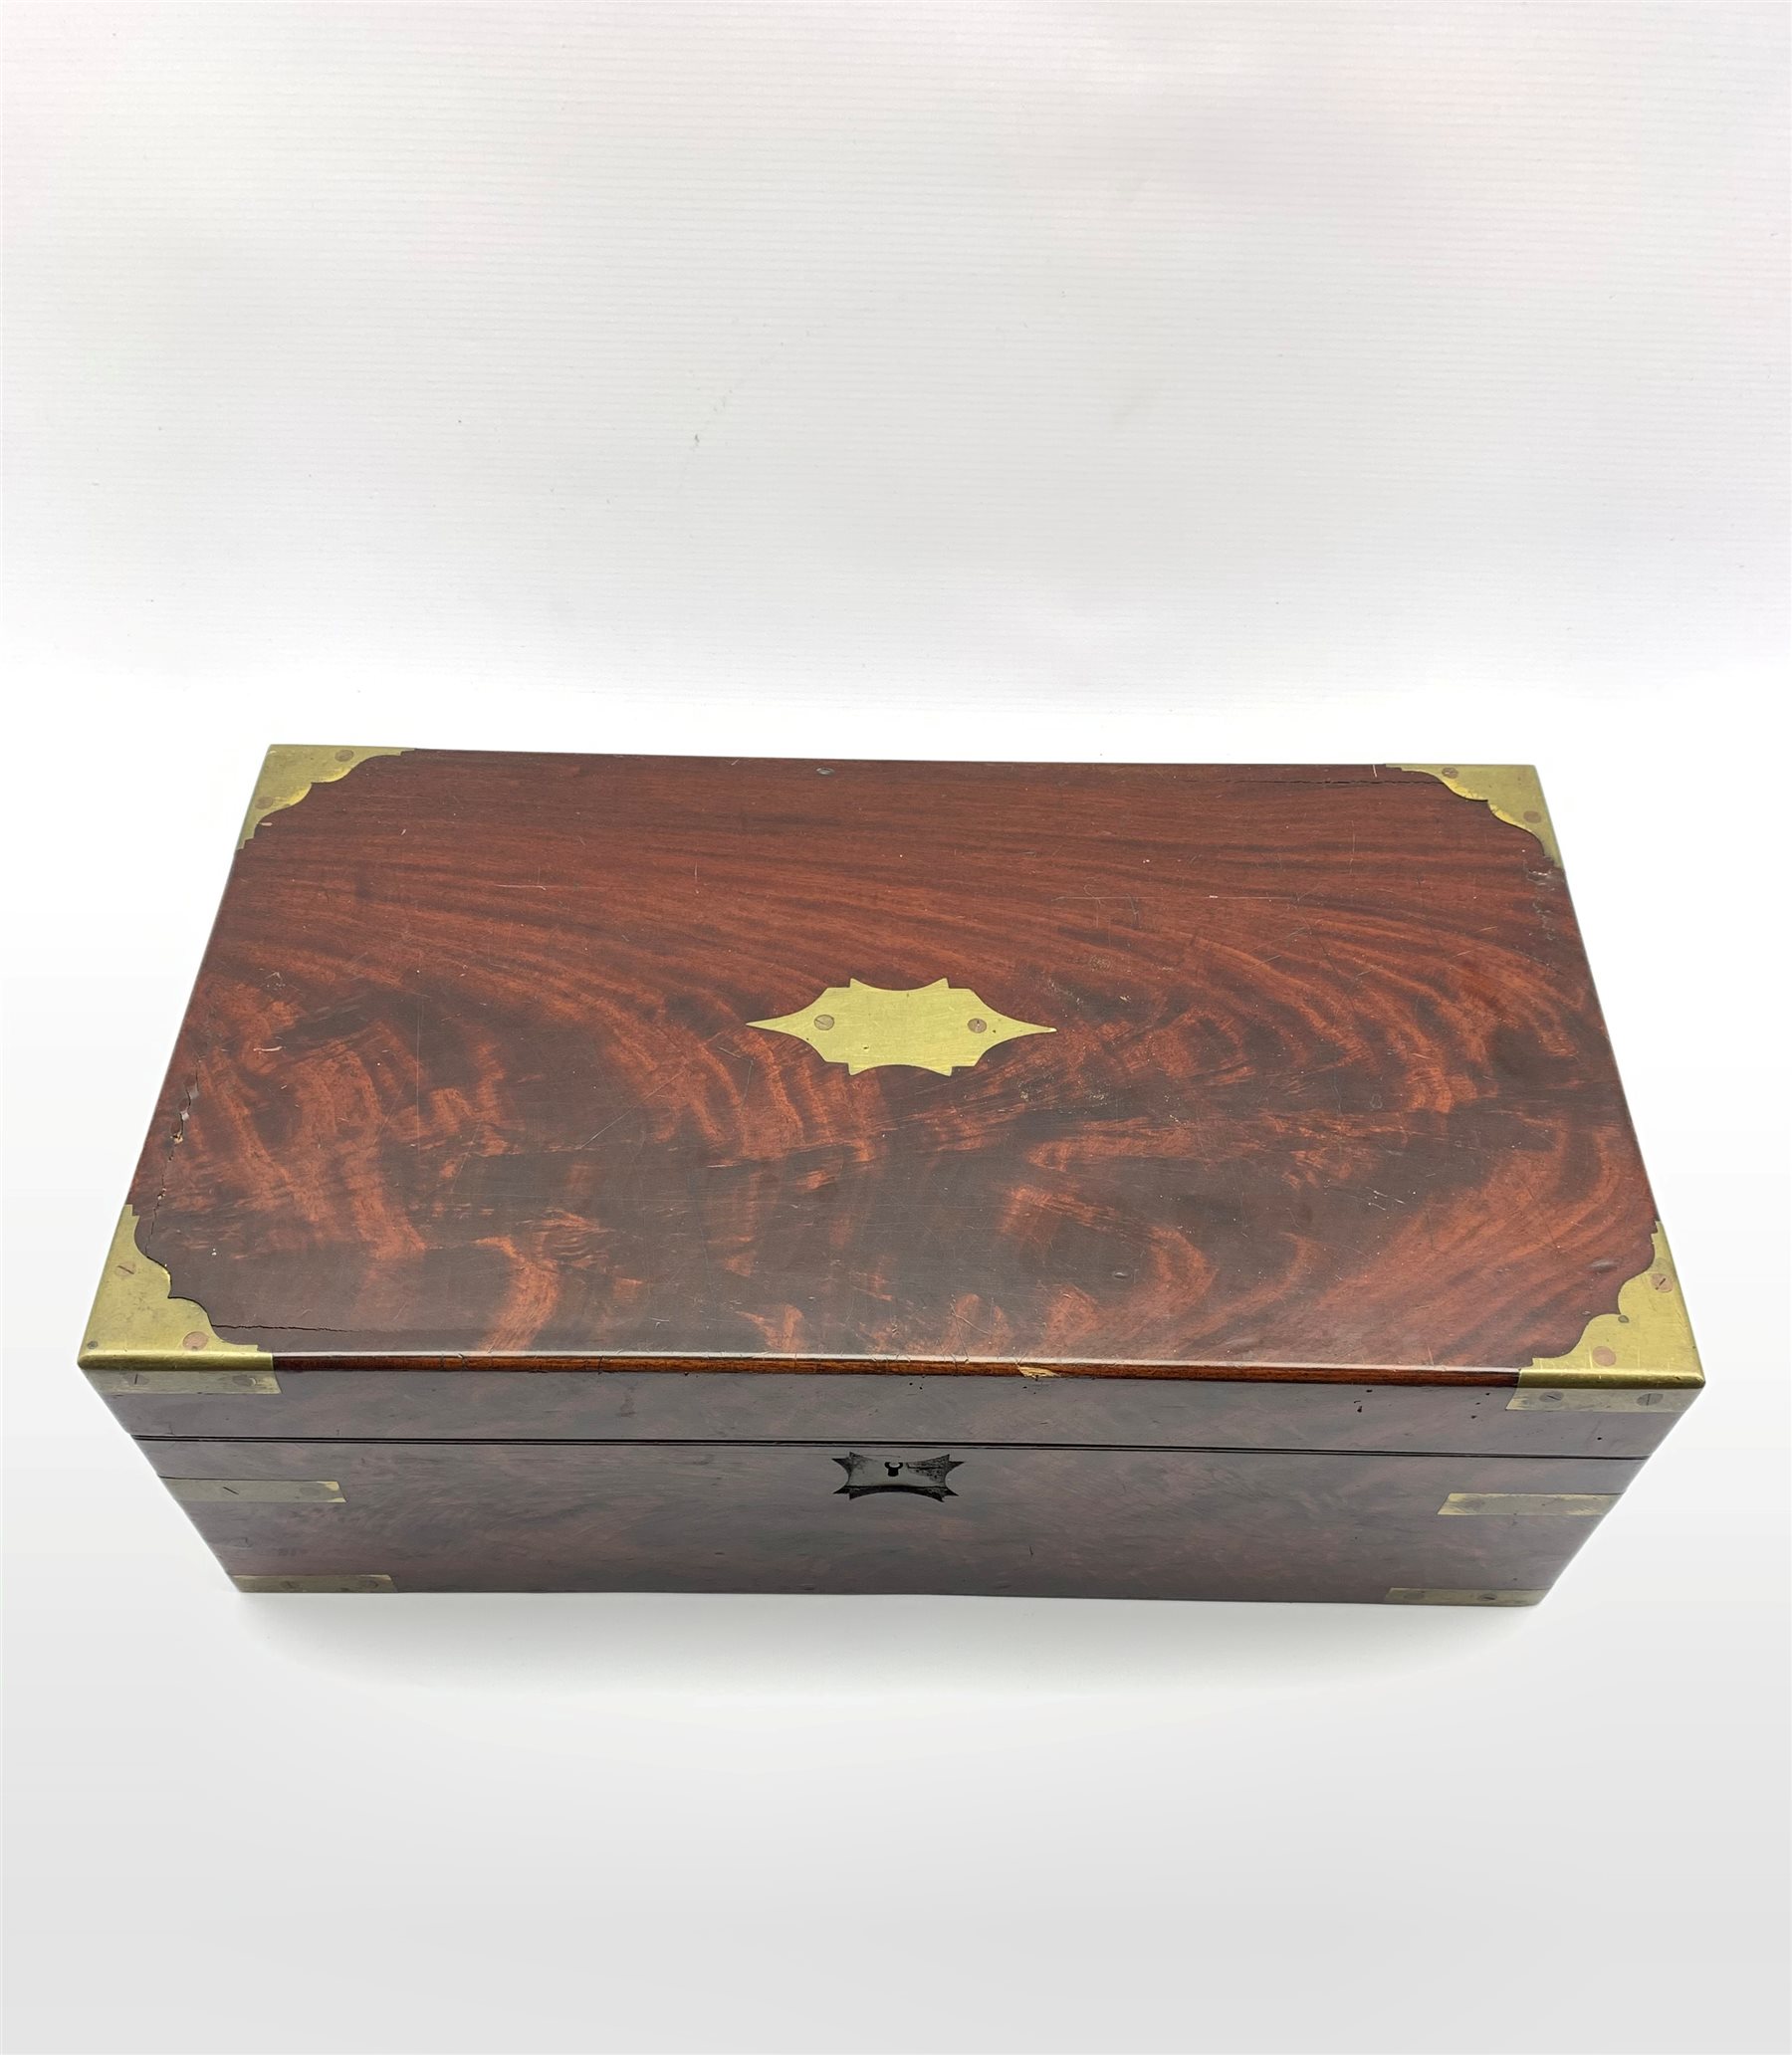 19th century figured mahogany brass mounted campaign writing slope with leather writing surface, twi - Image 2 of 3